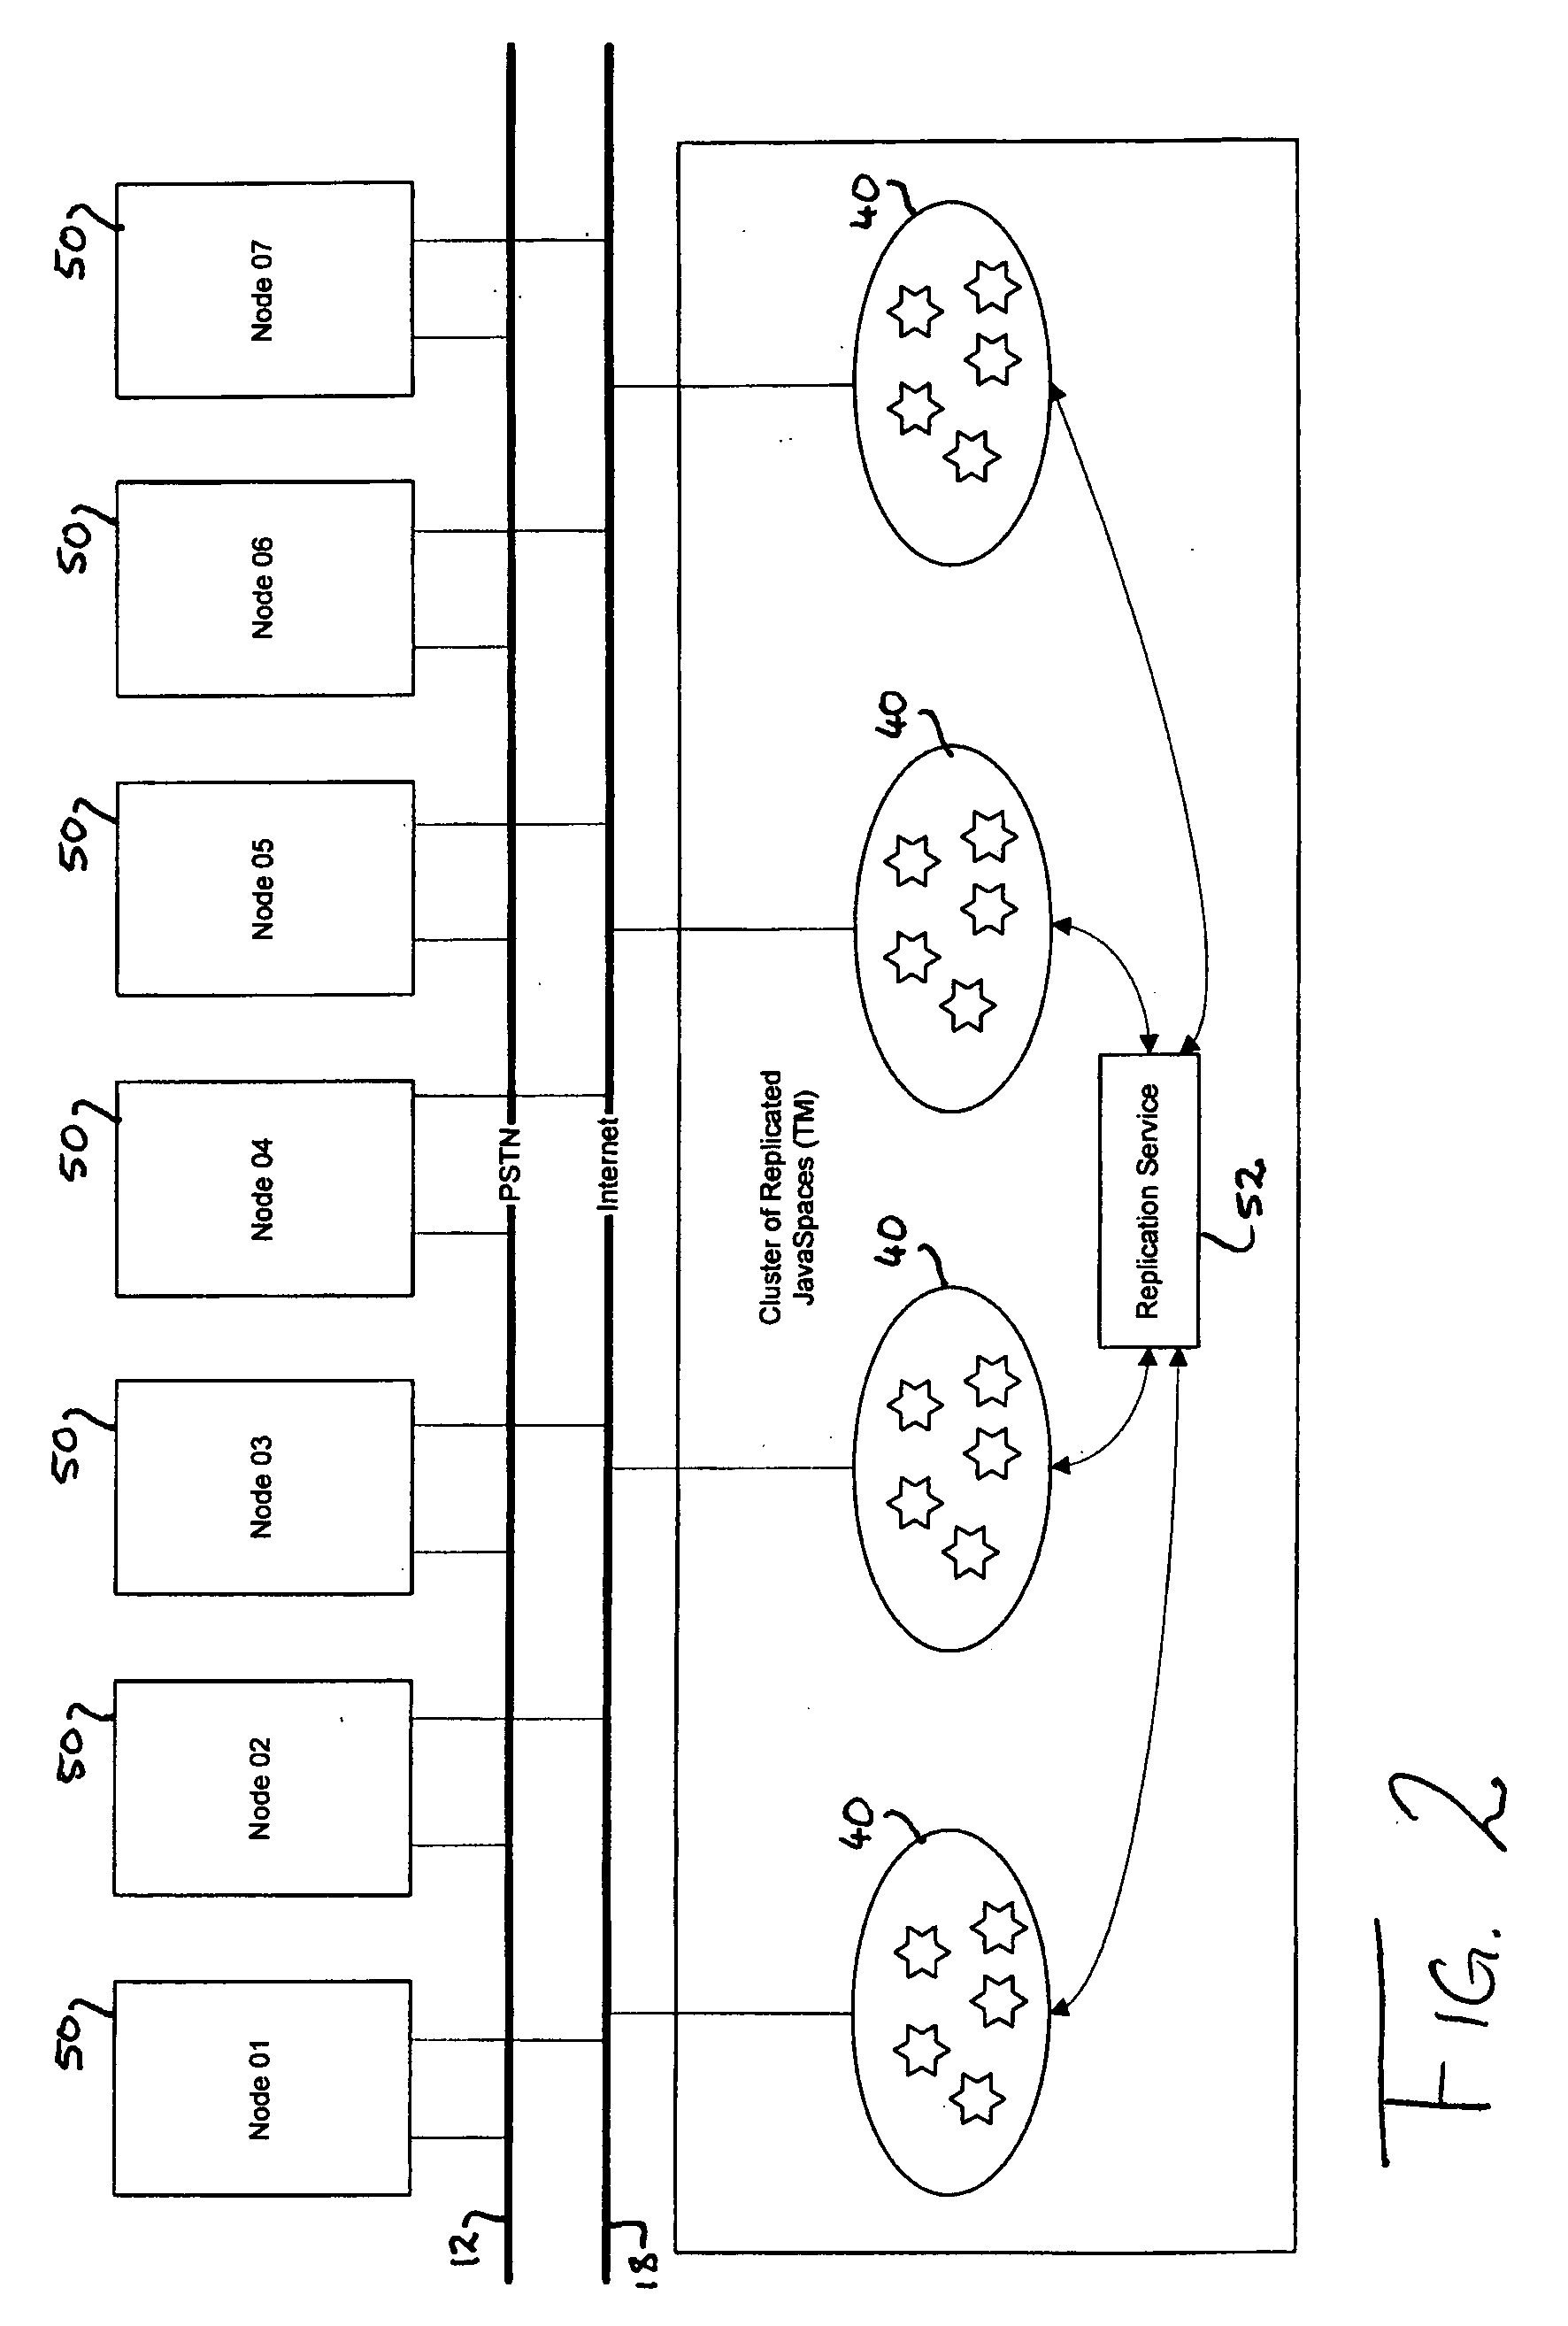 Method and system for distributing contacts within a network